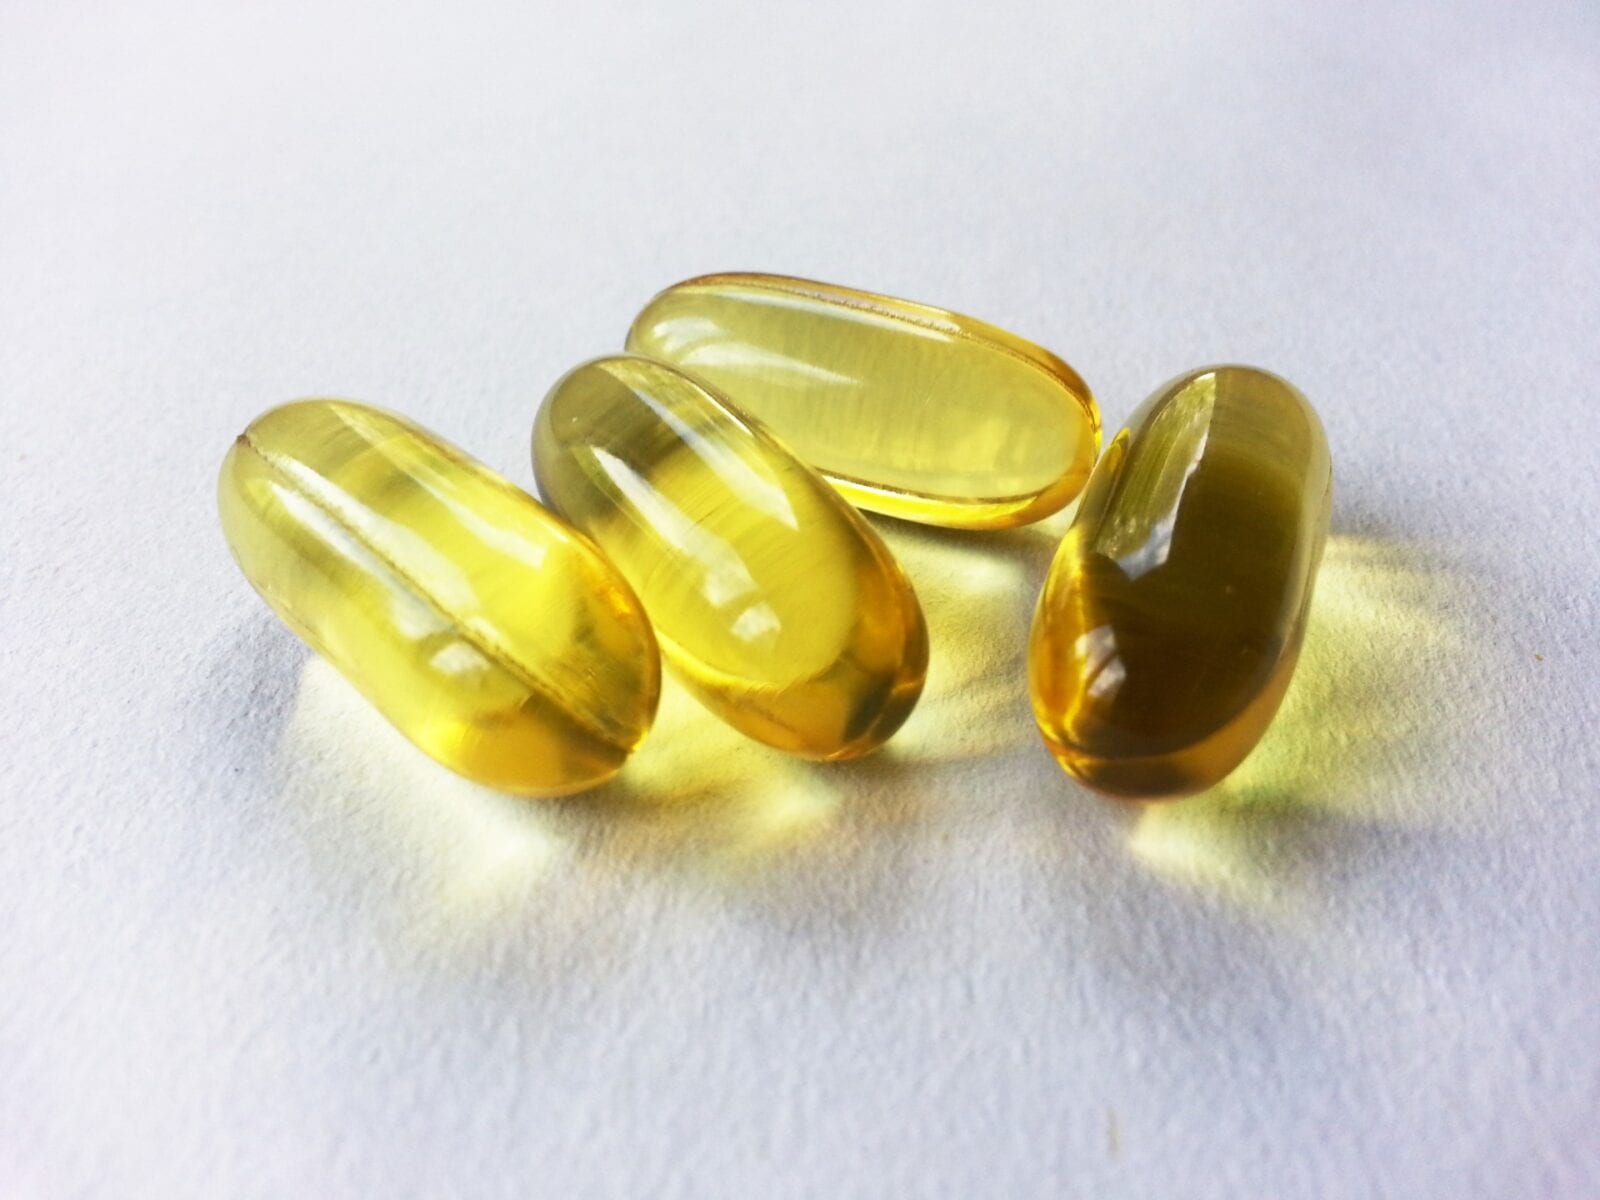 Free Vitamin D pills will be distributed to over 2.5 million people in England this winter, The Manc